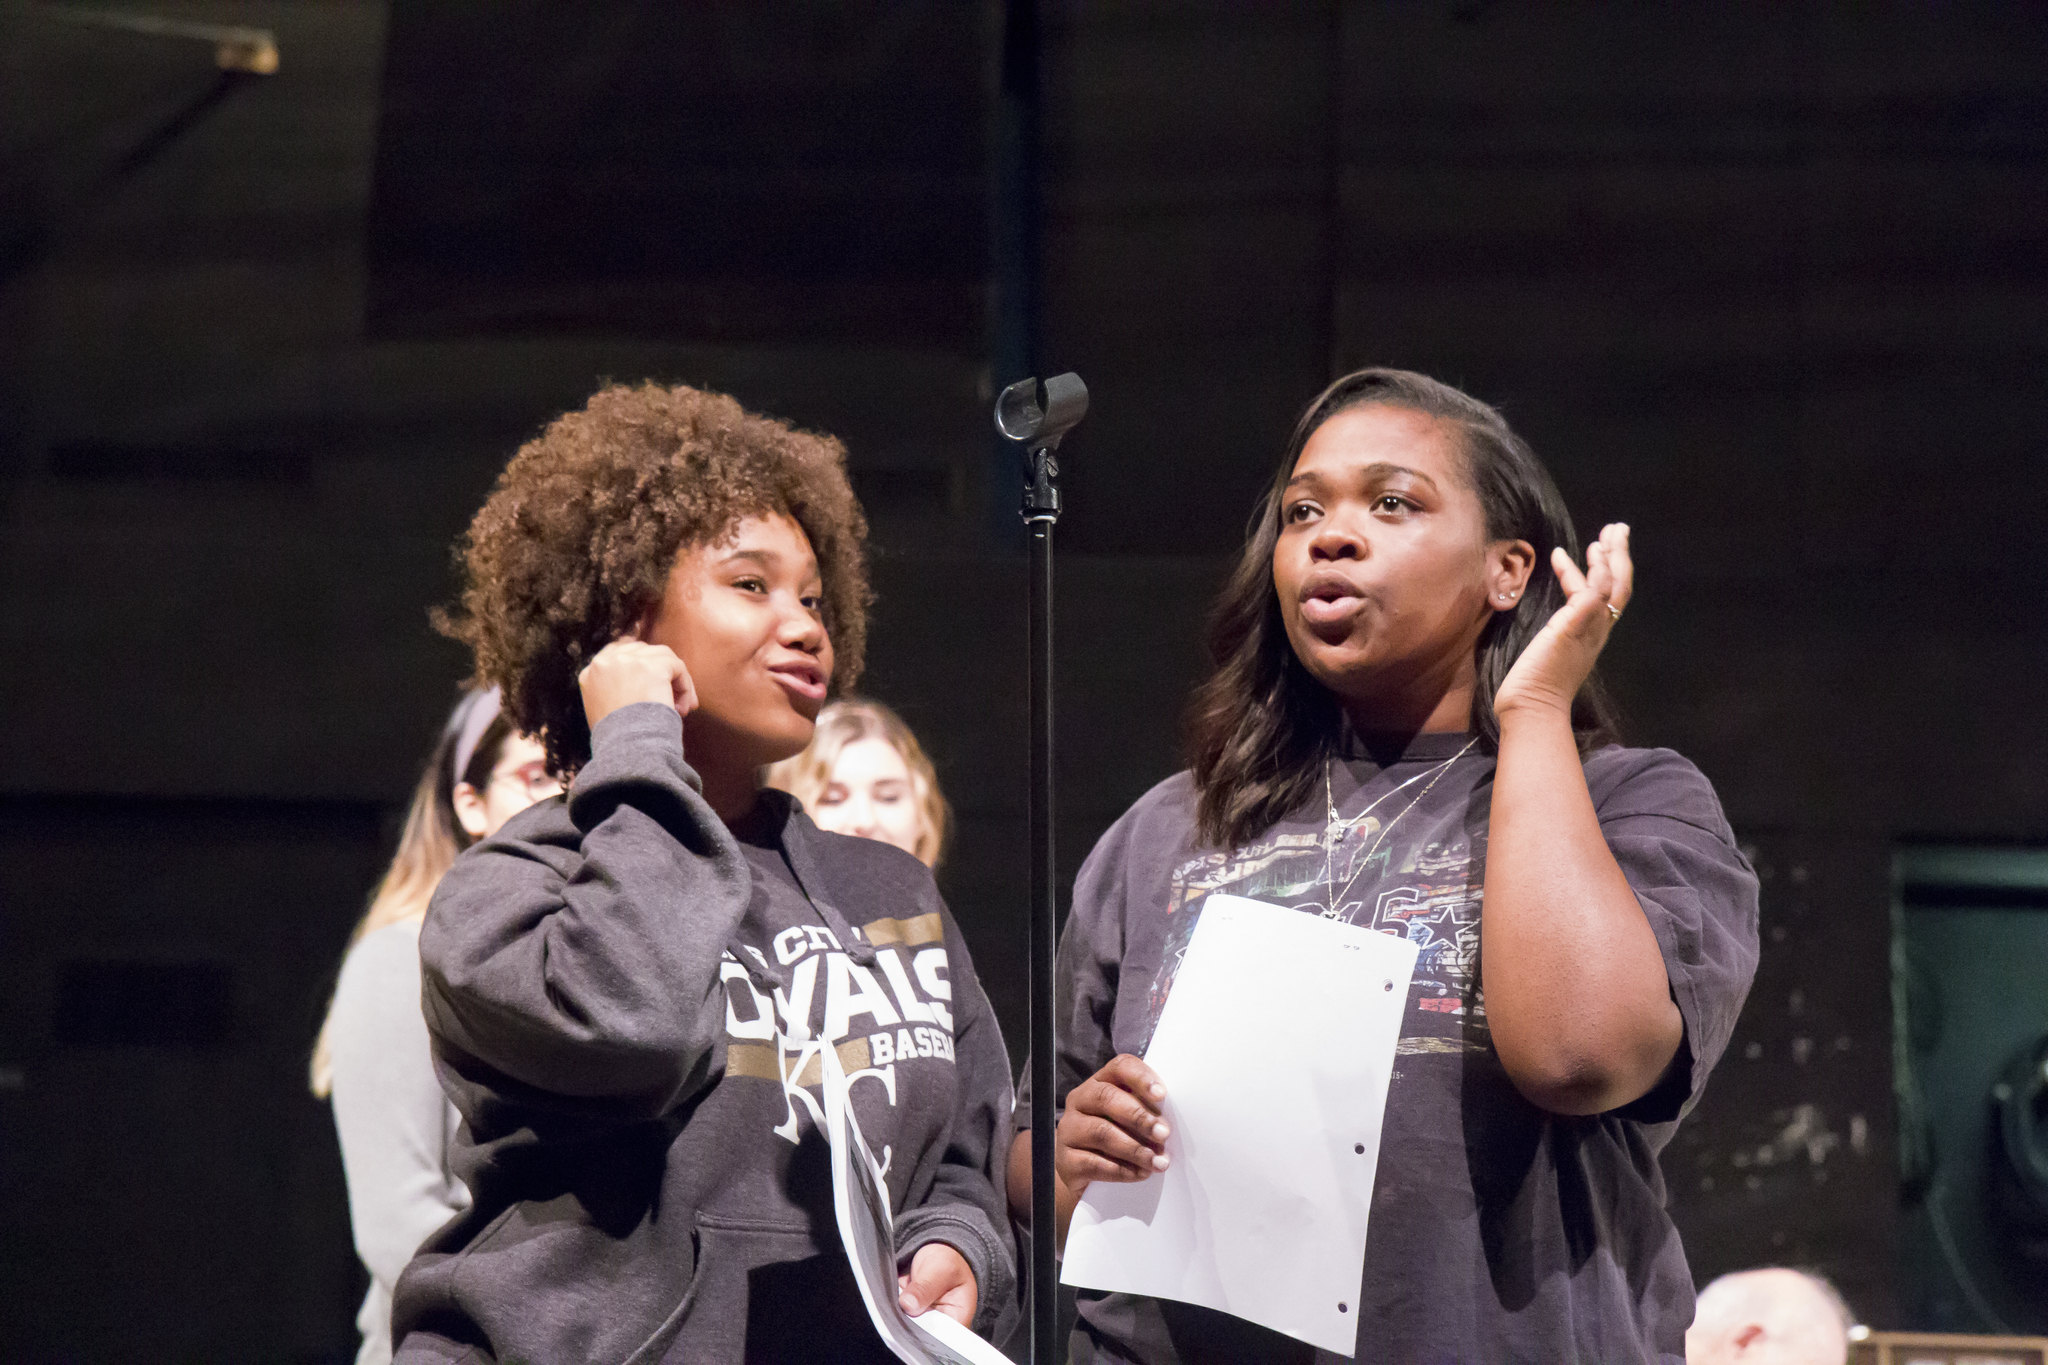 Two students sing on stage.